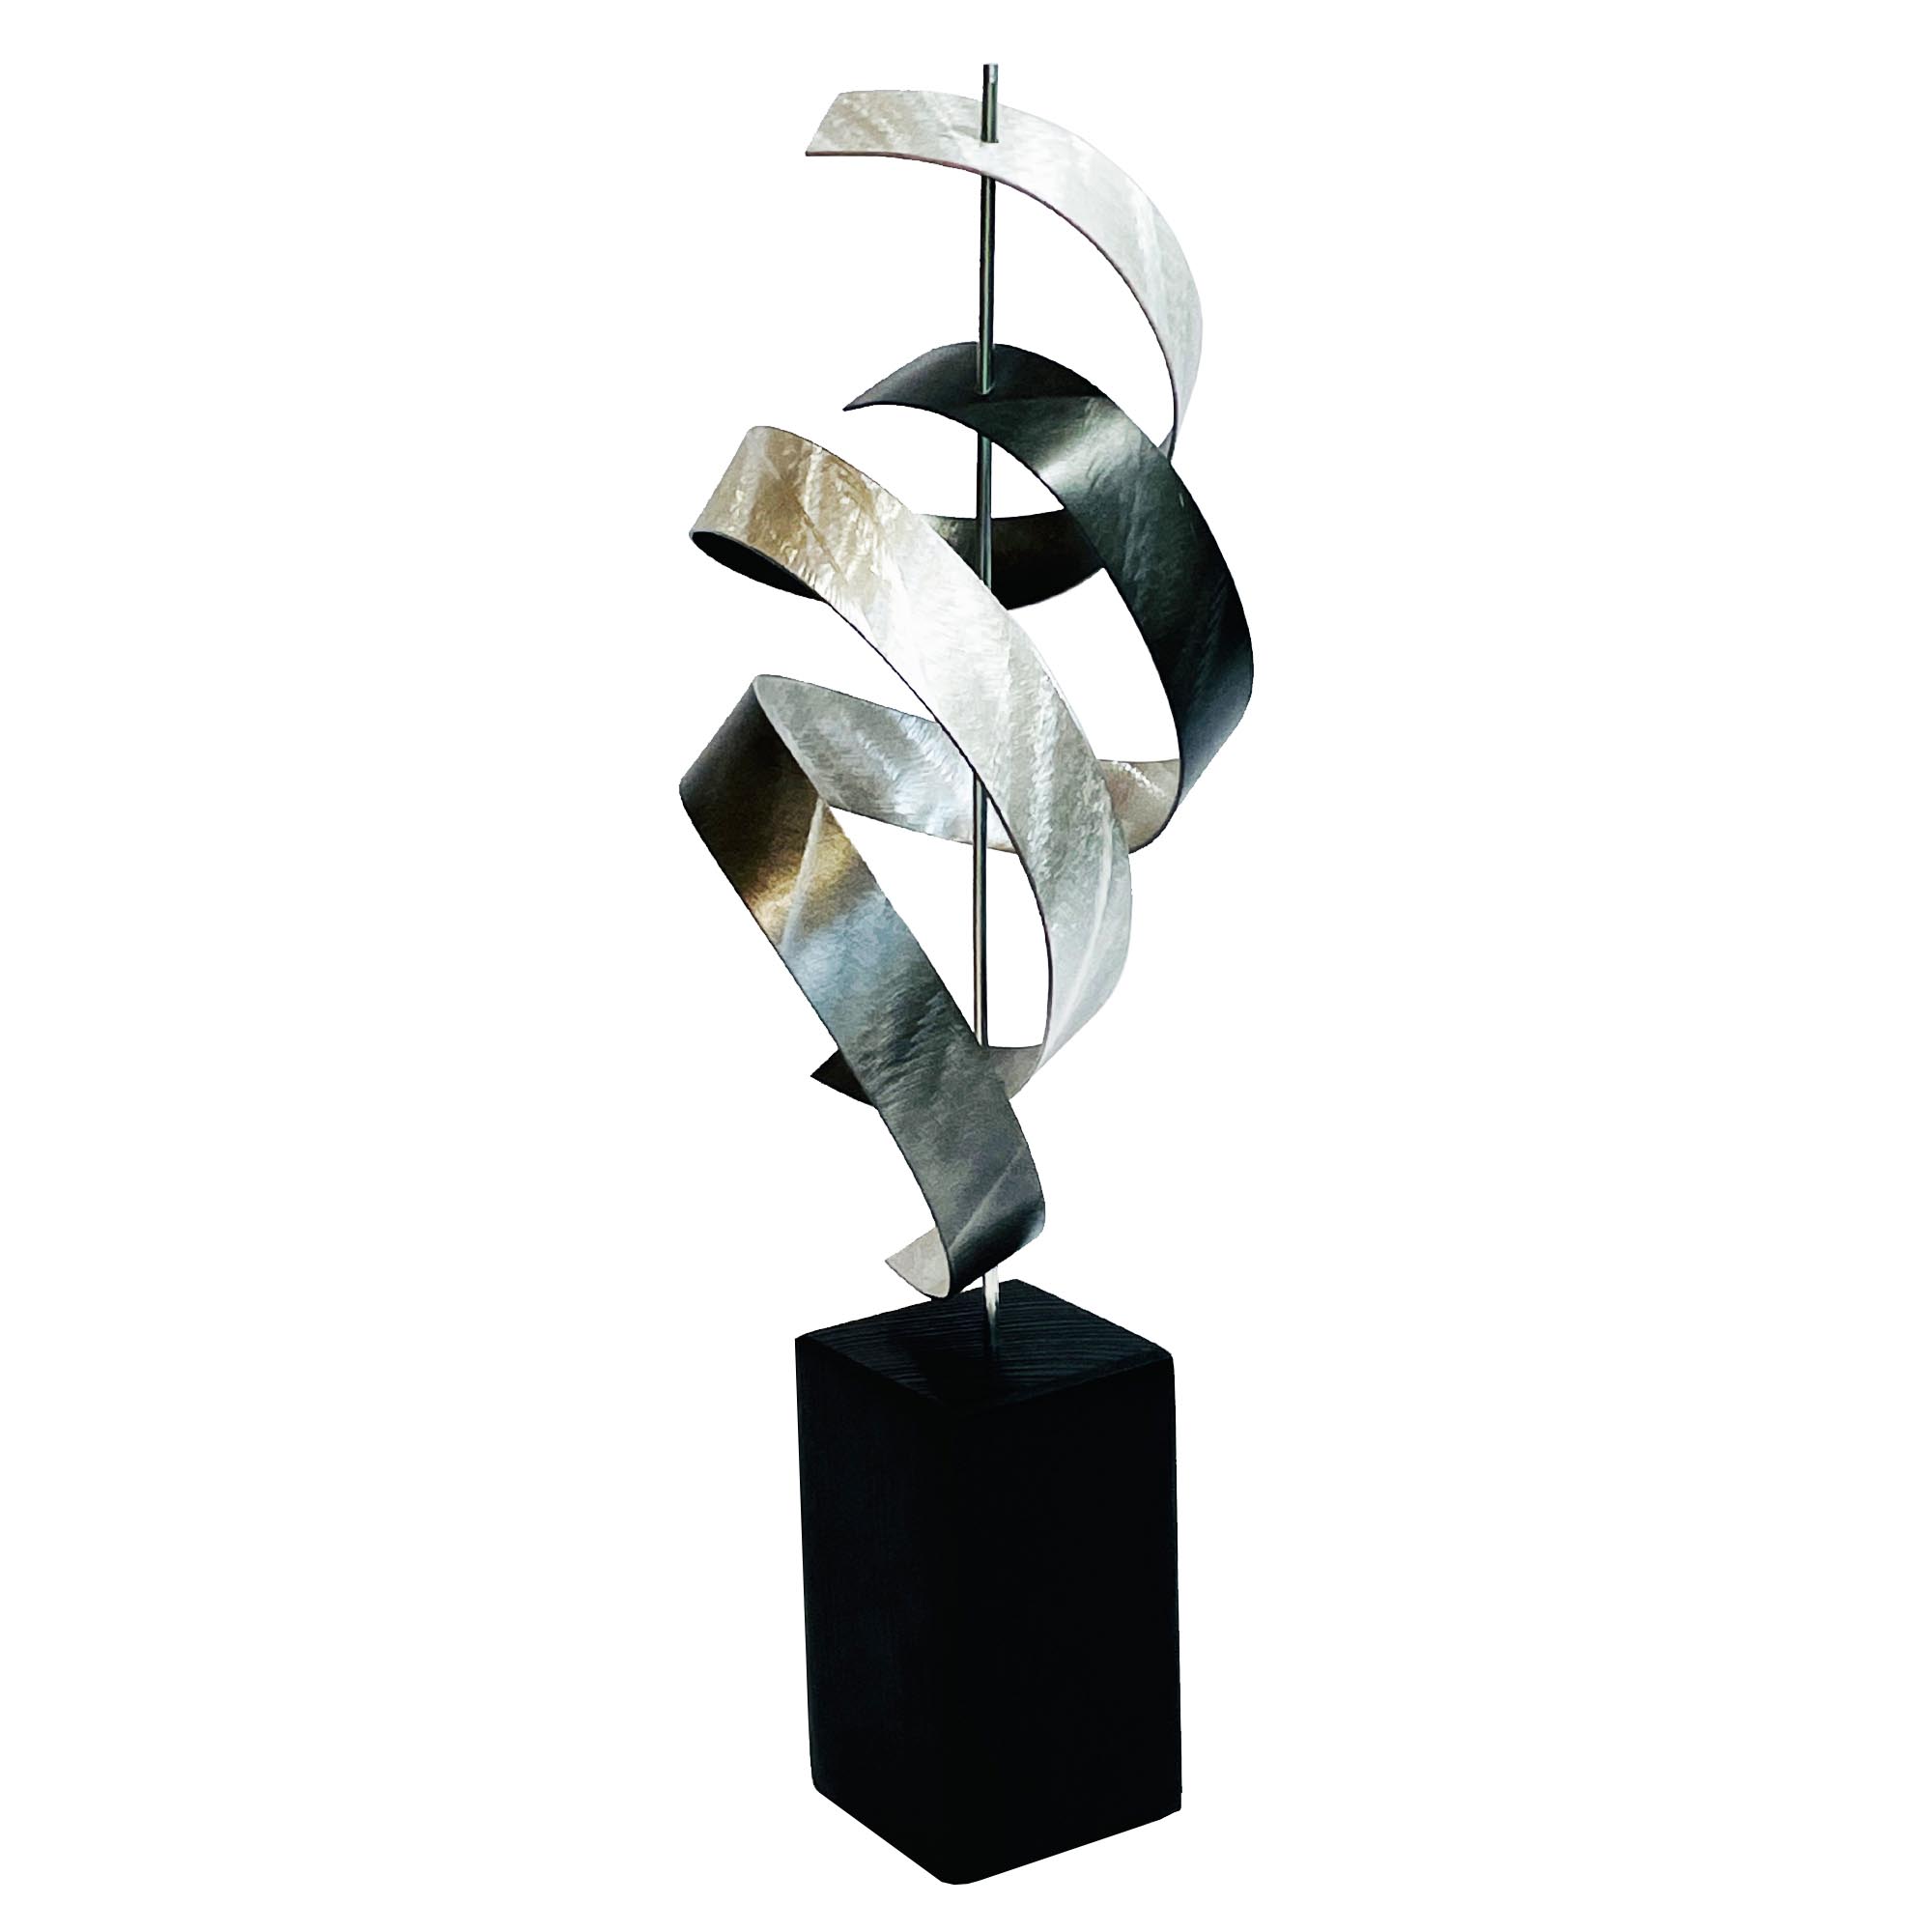 Waltz v3 by Jackson Wright - Abstract Metal Sculpture, Kinetic Sculpture - Image 3